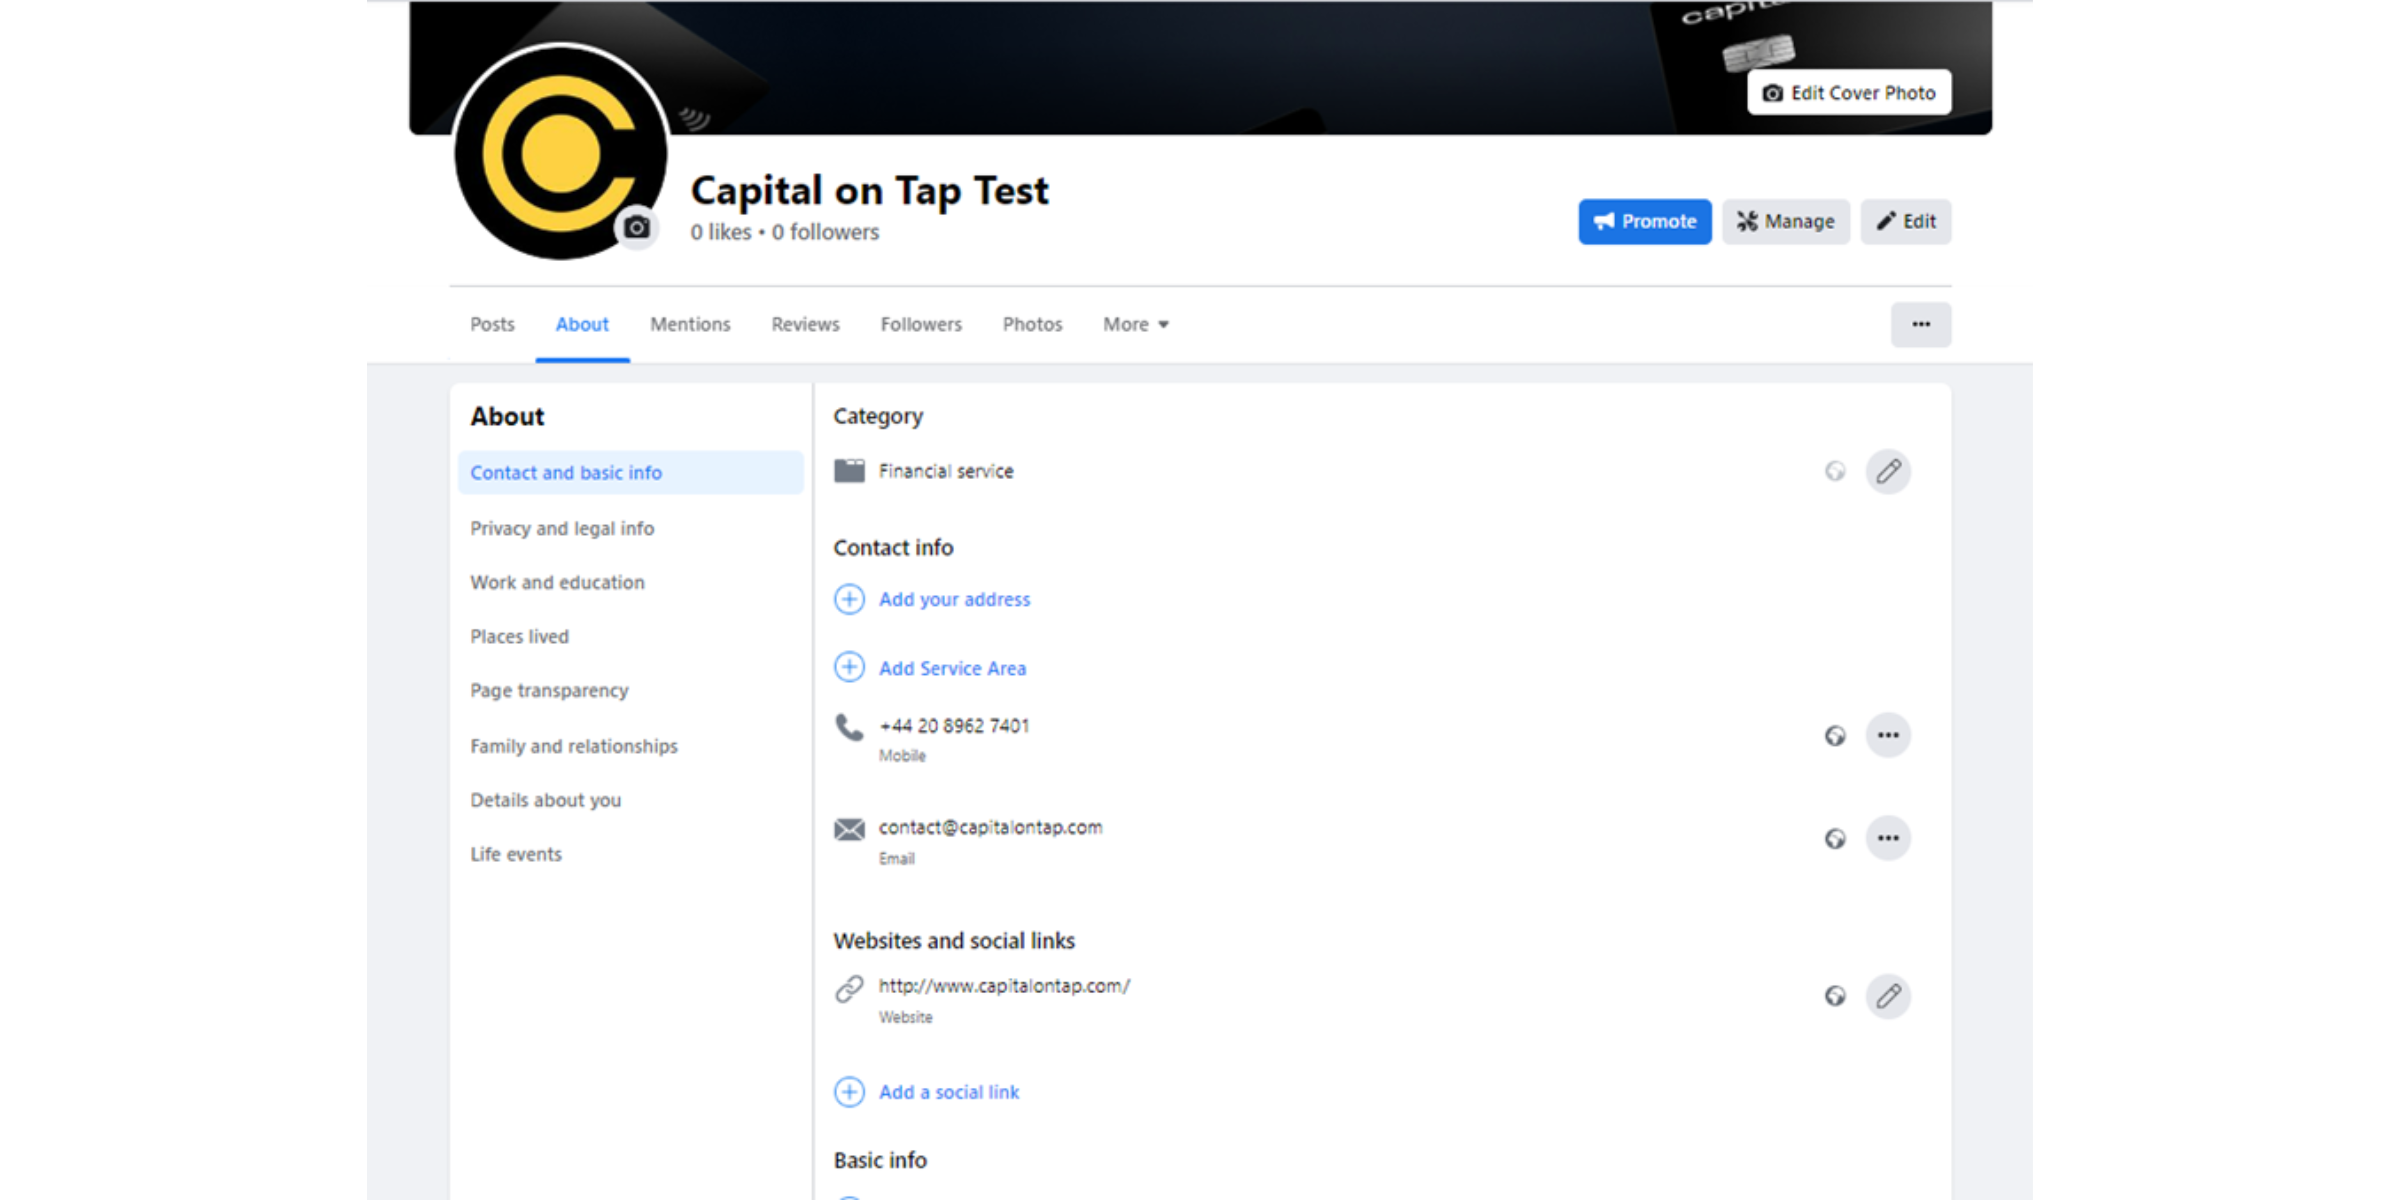 A screenshot of the Capital on Tap 'About' section on Facebook. It shows where to add contact info, and website links